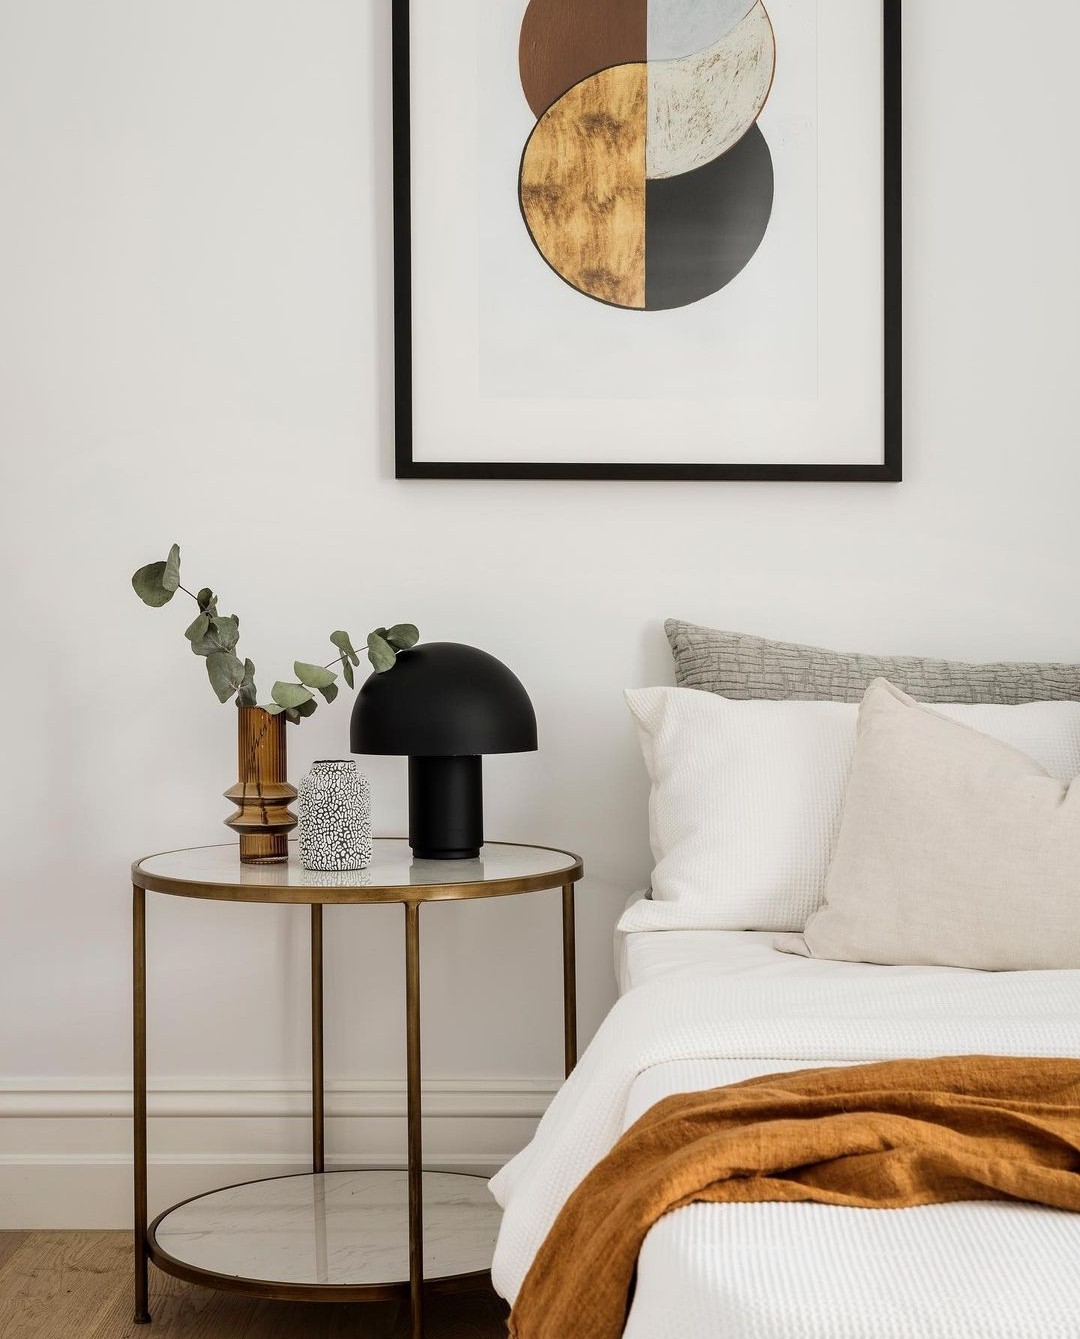 Bedroom with minimal styling and side table vignette